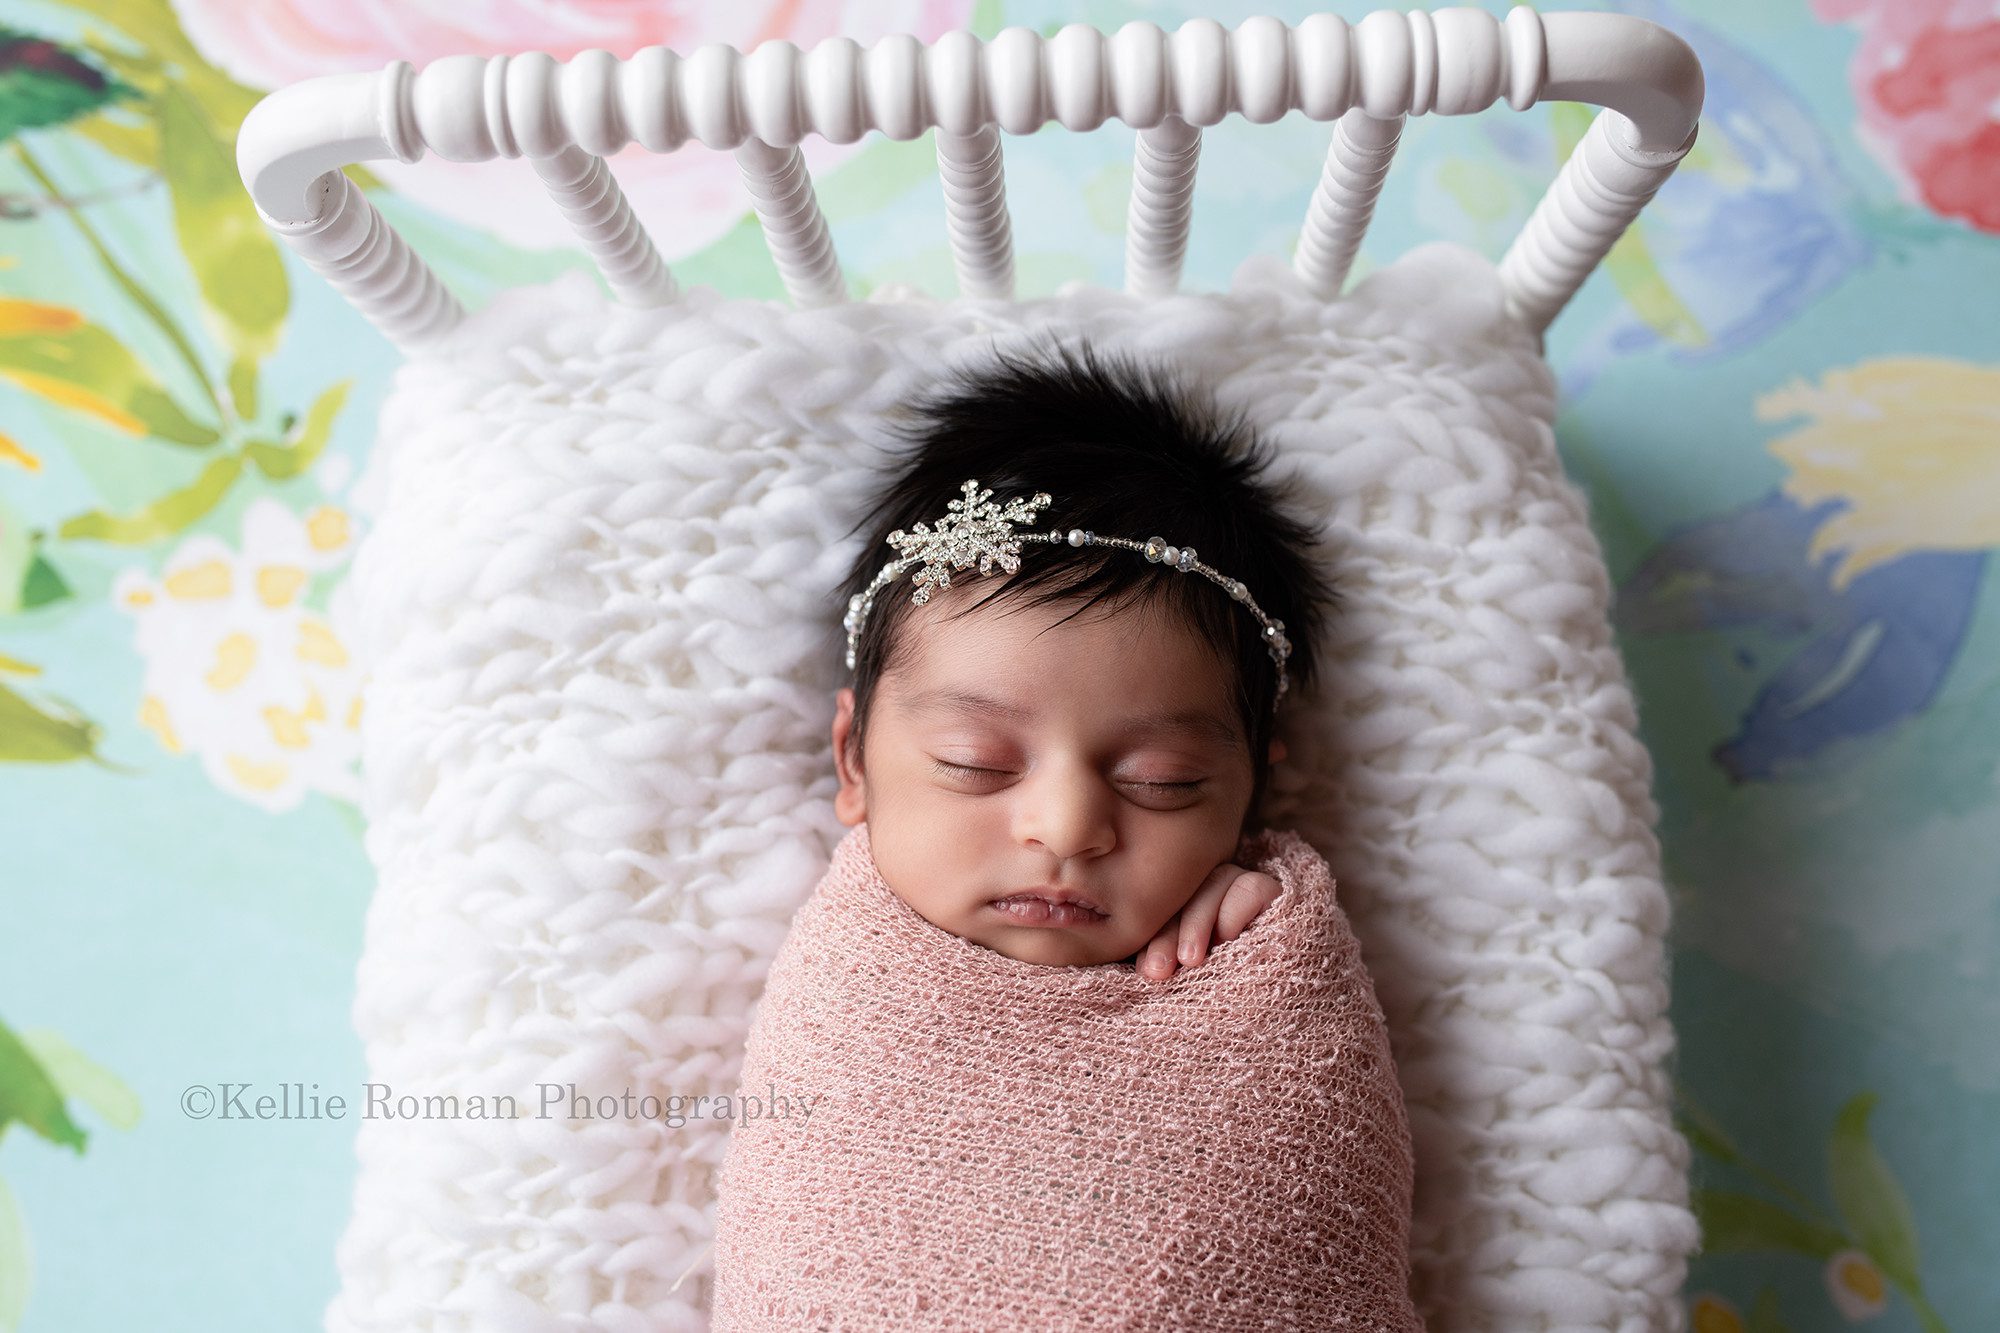 all wrapped up a newborn baby girl is in a milwaukee photographers studio located in greendale Wisconsin. The baby is wrapped in a pink swaddle and is sleeping on top of a white bed with a white knit blanket she has one had sticking out of the wrap. she has dark skin and lots of dark hair and has a rhinestone snowflake headband on